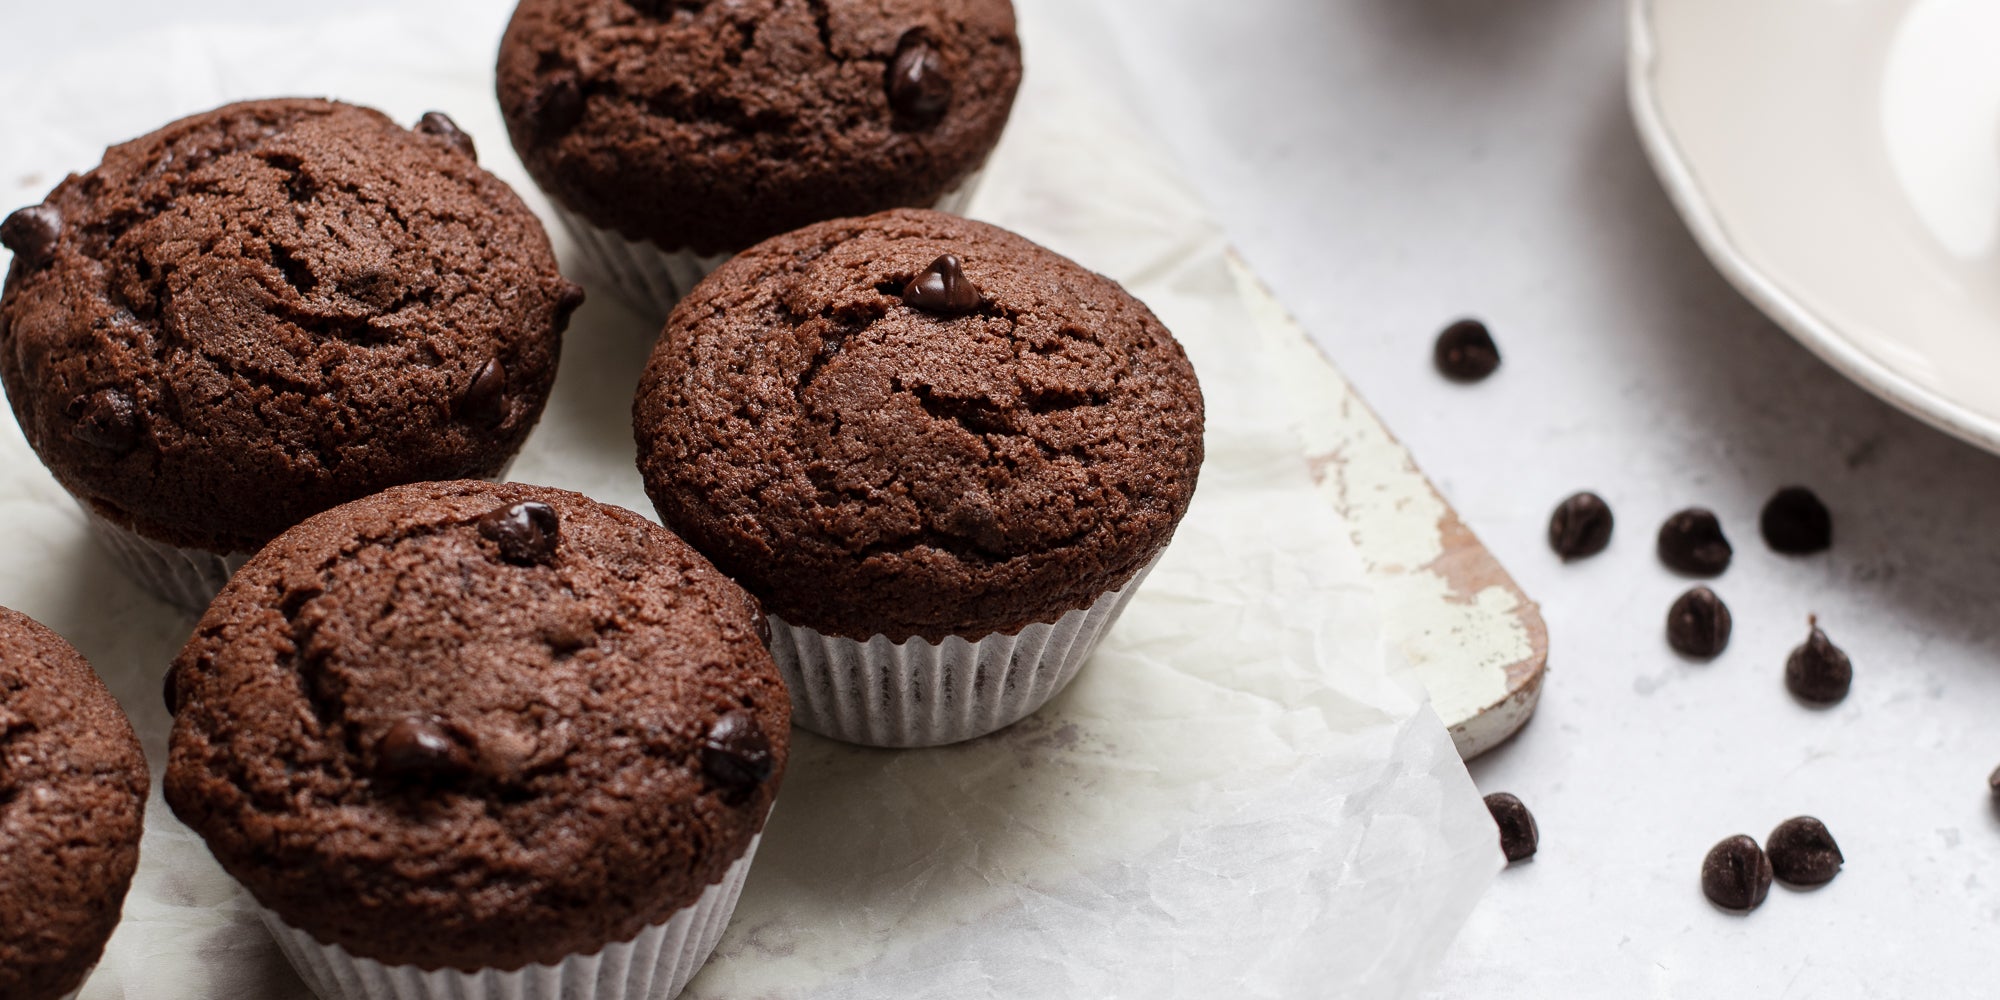 Close up of four Gluten Free Chocolate Muffins on a serving board next to scattered chocolate chips